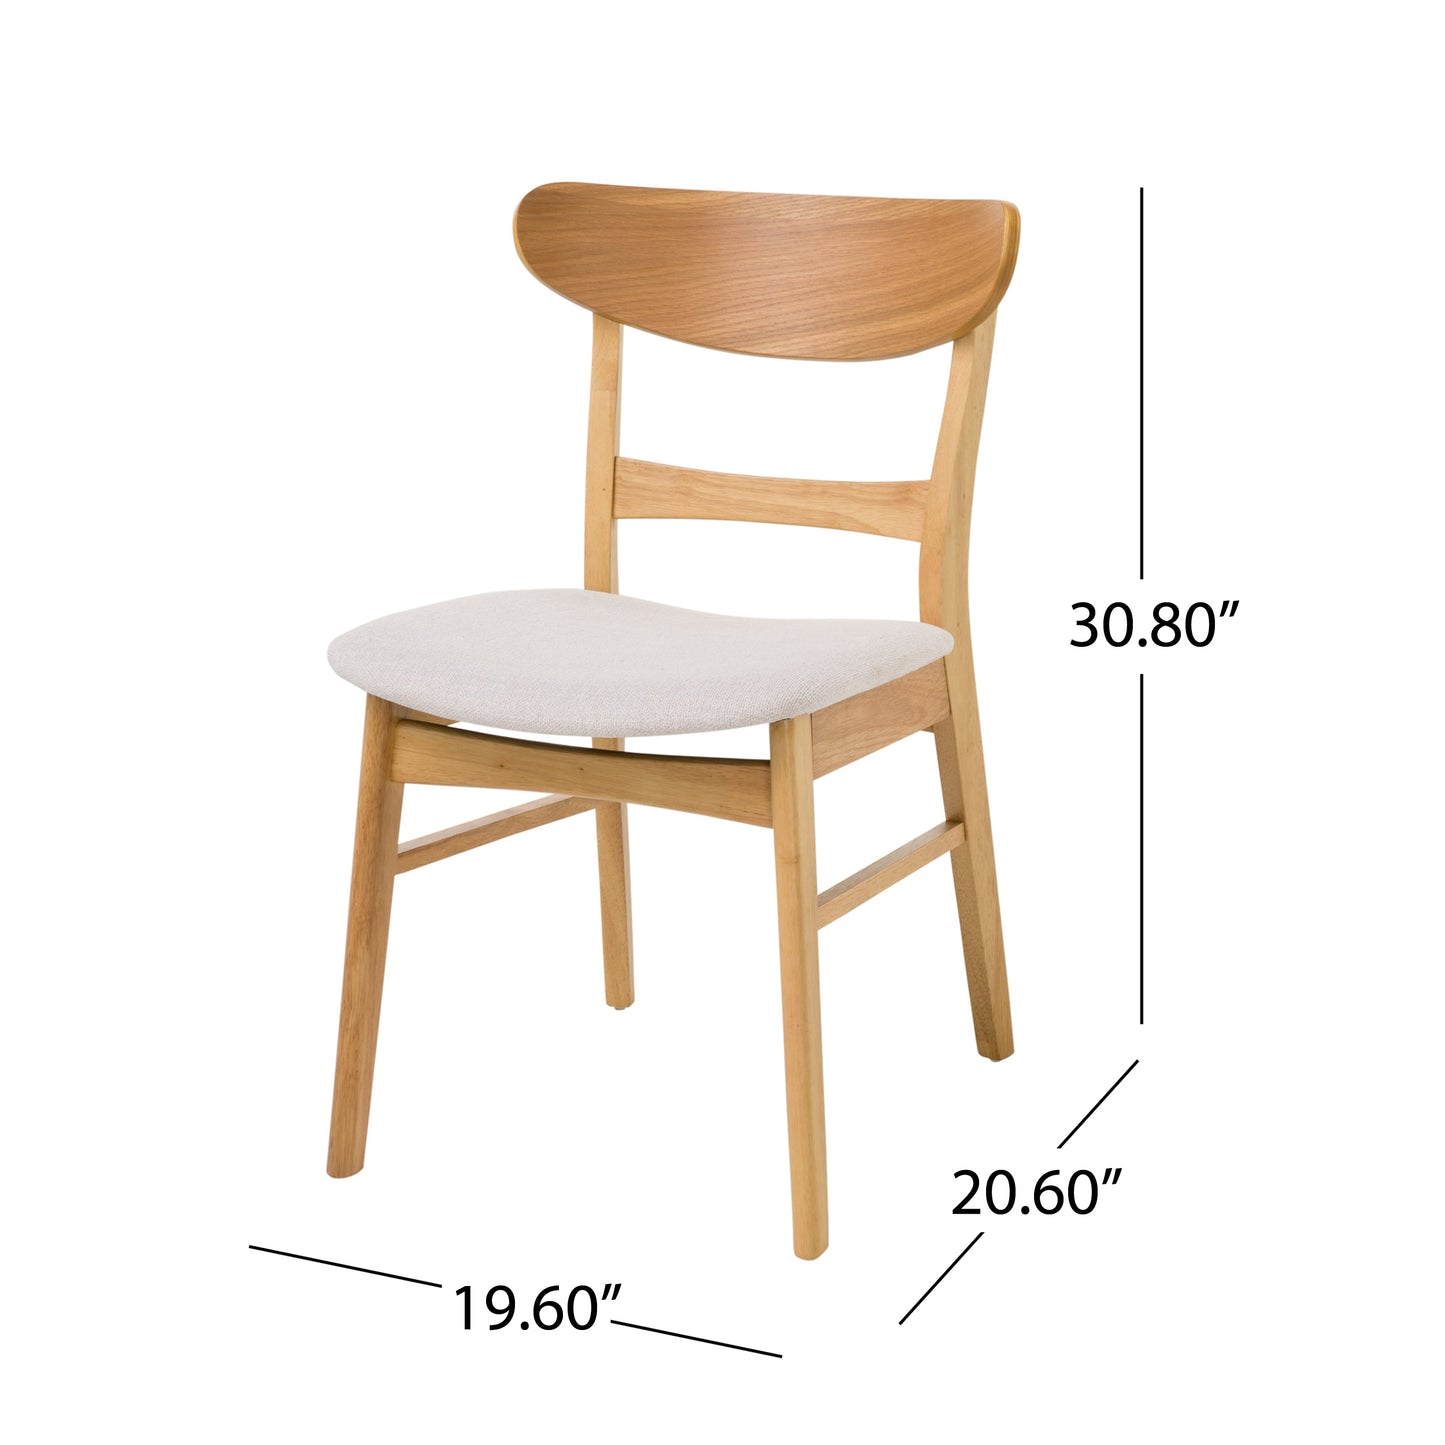 Isador Mid-Century Modern Dining Chairs (Set of 4)